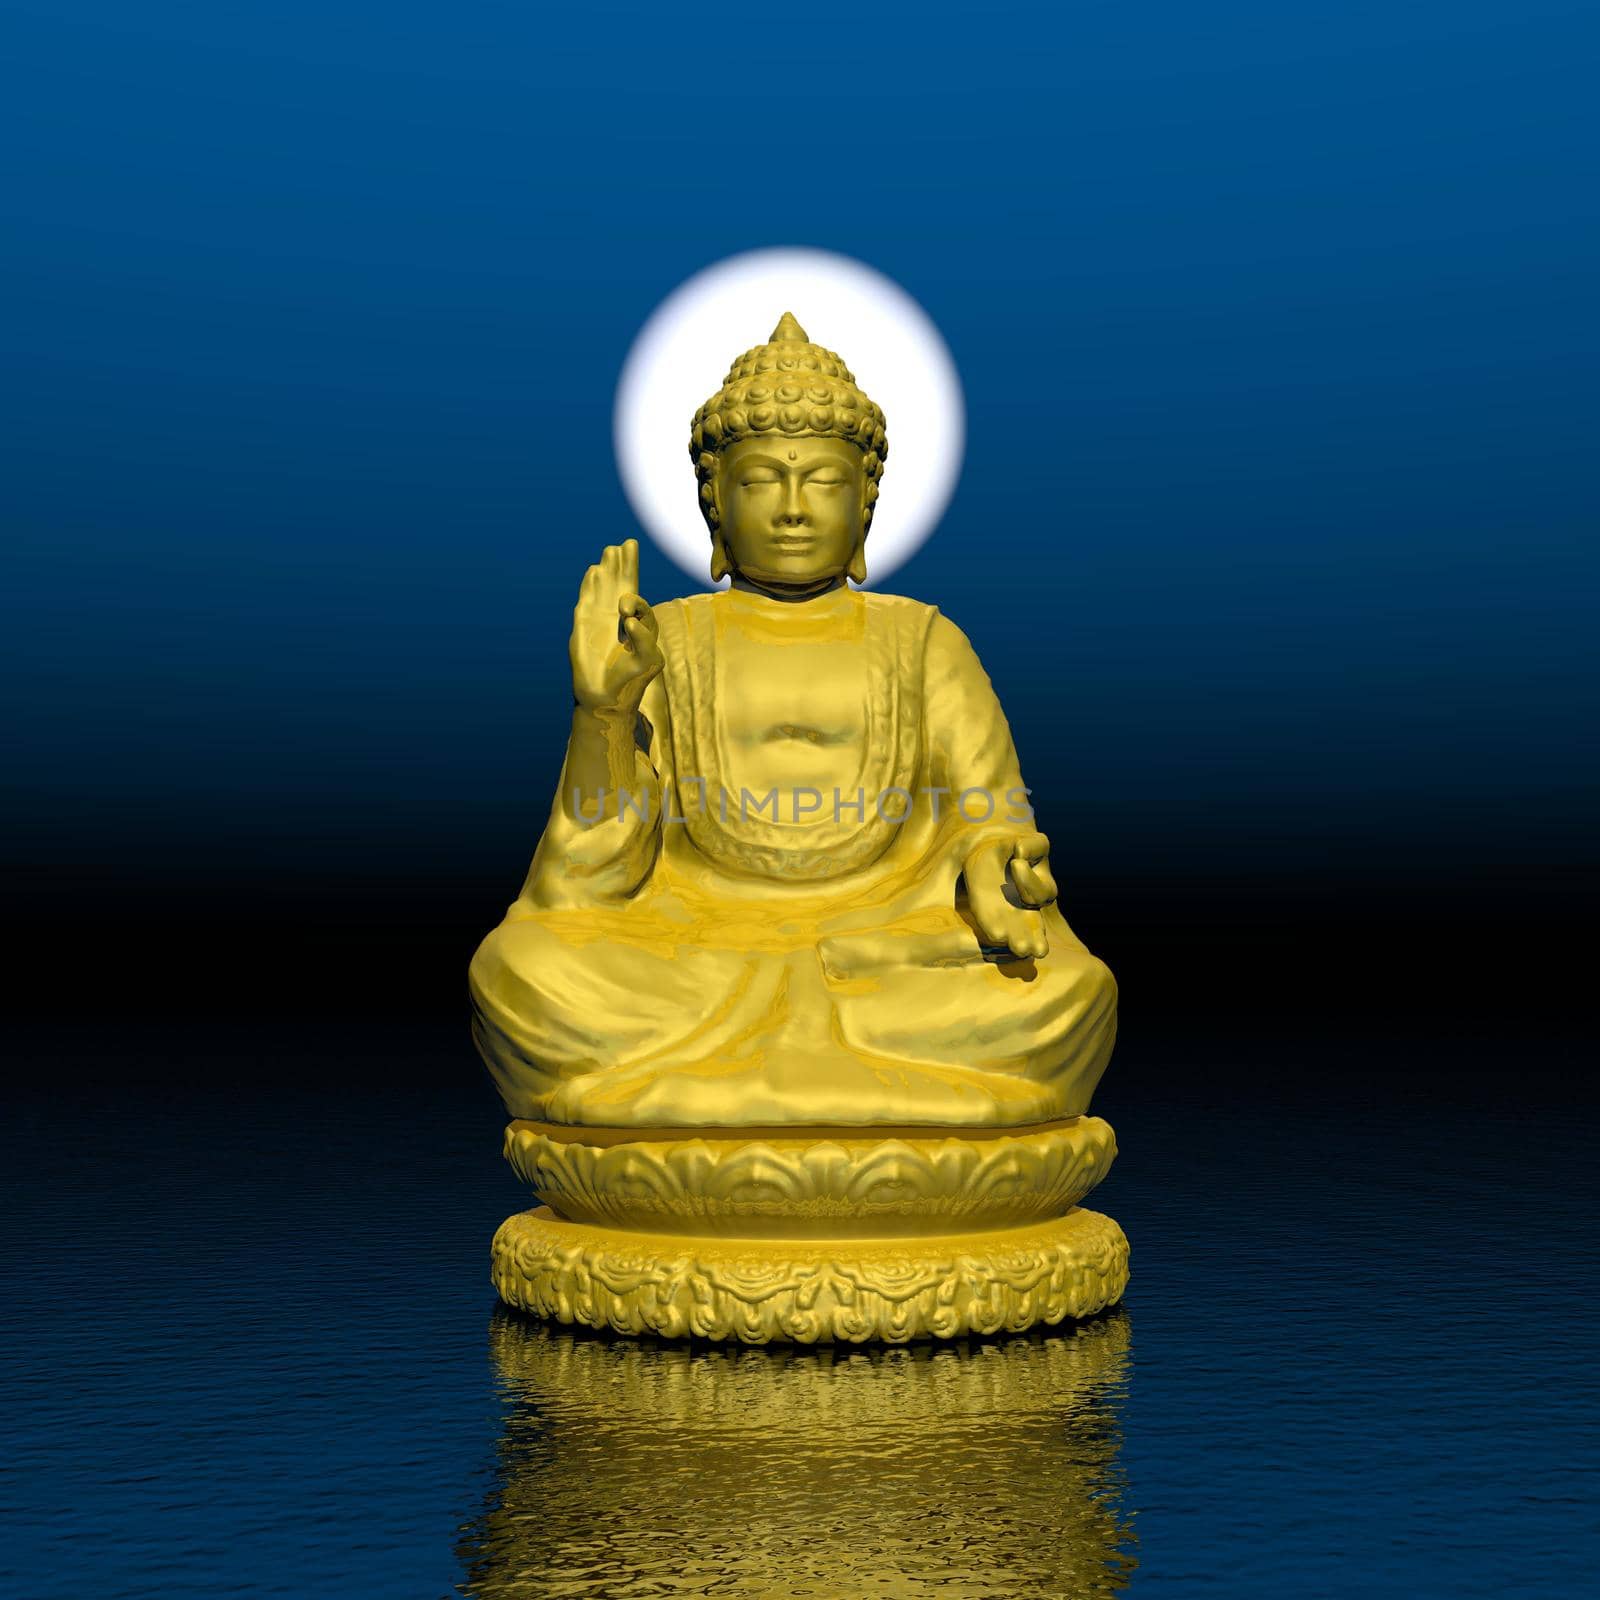 One golden buddha with white halo around the head meditating on water by beautiful night